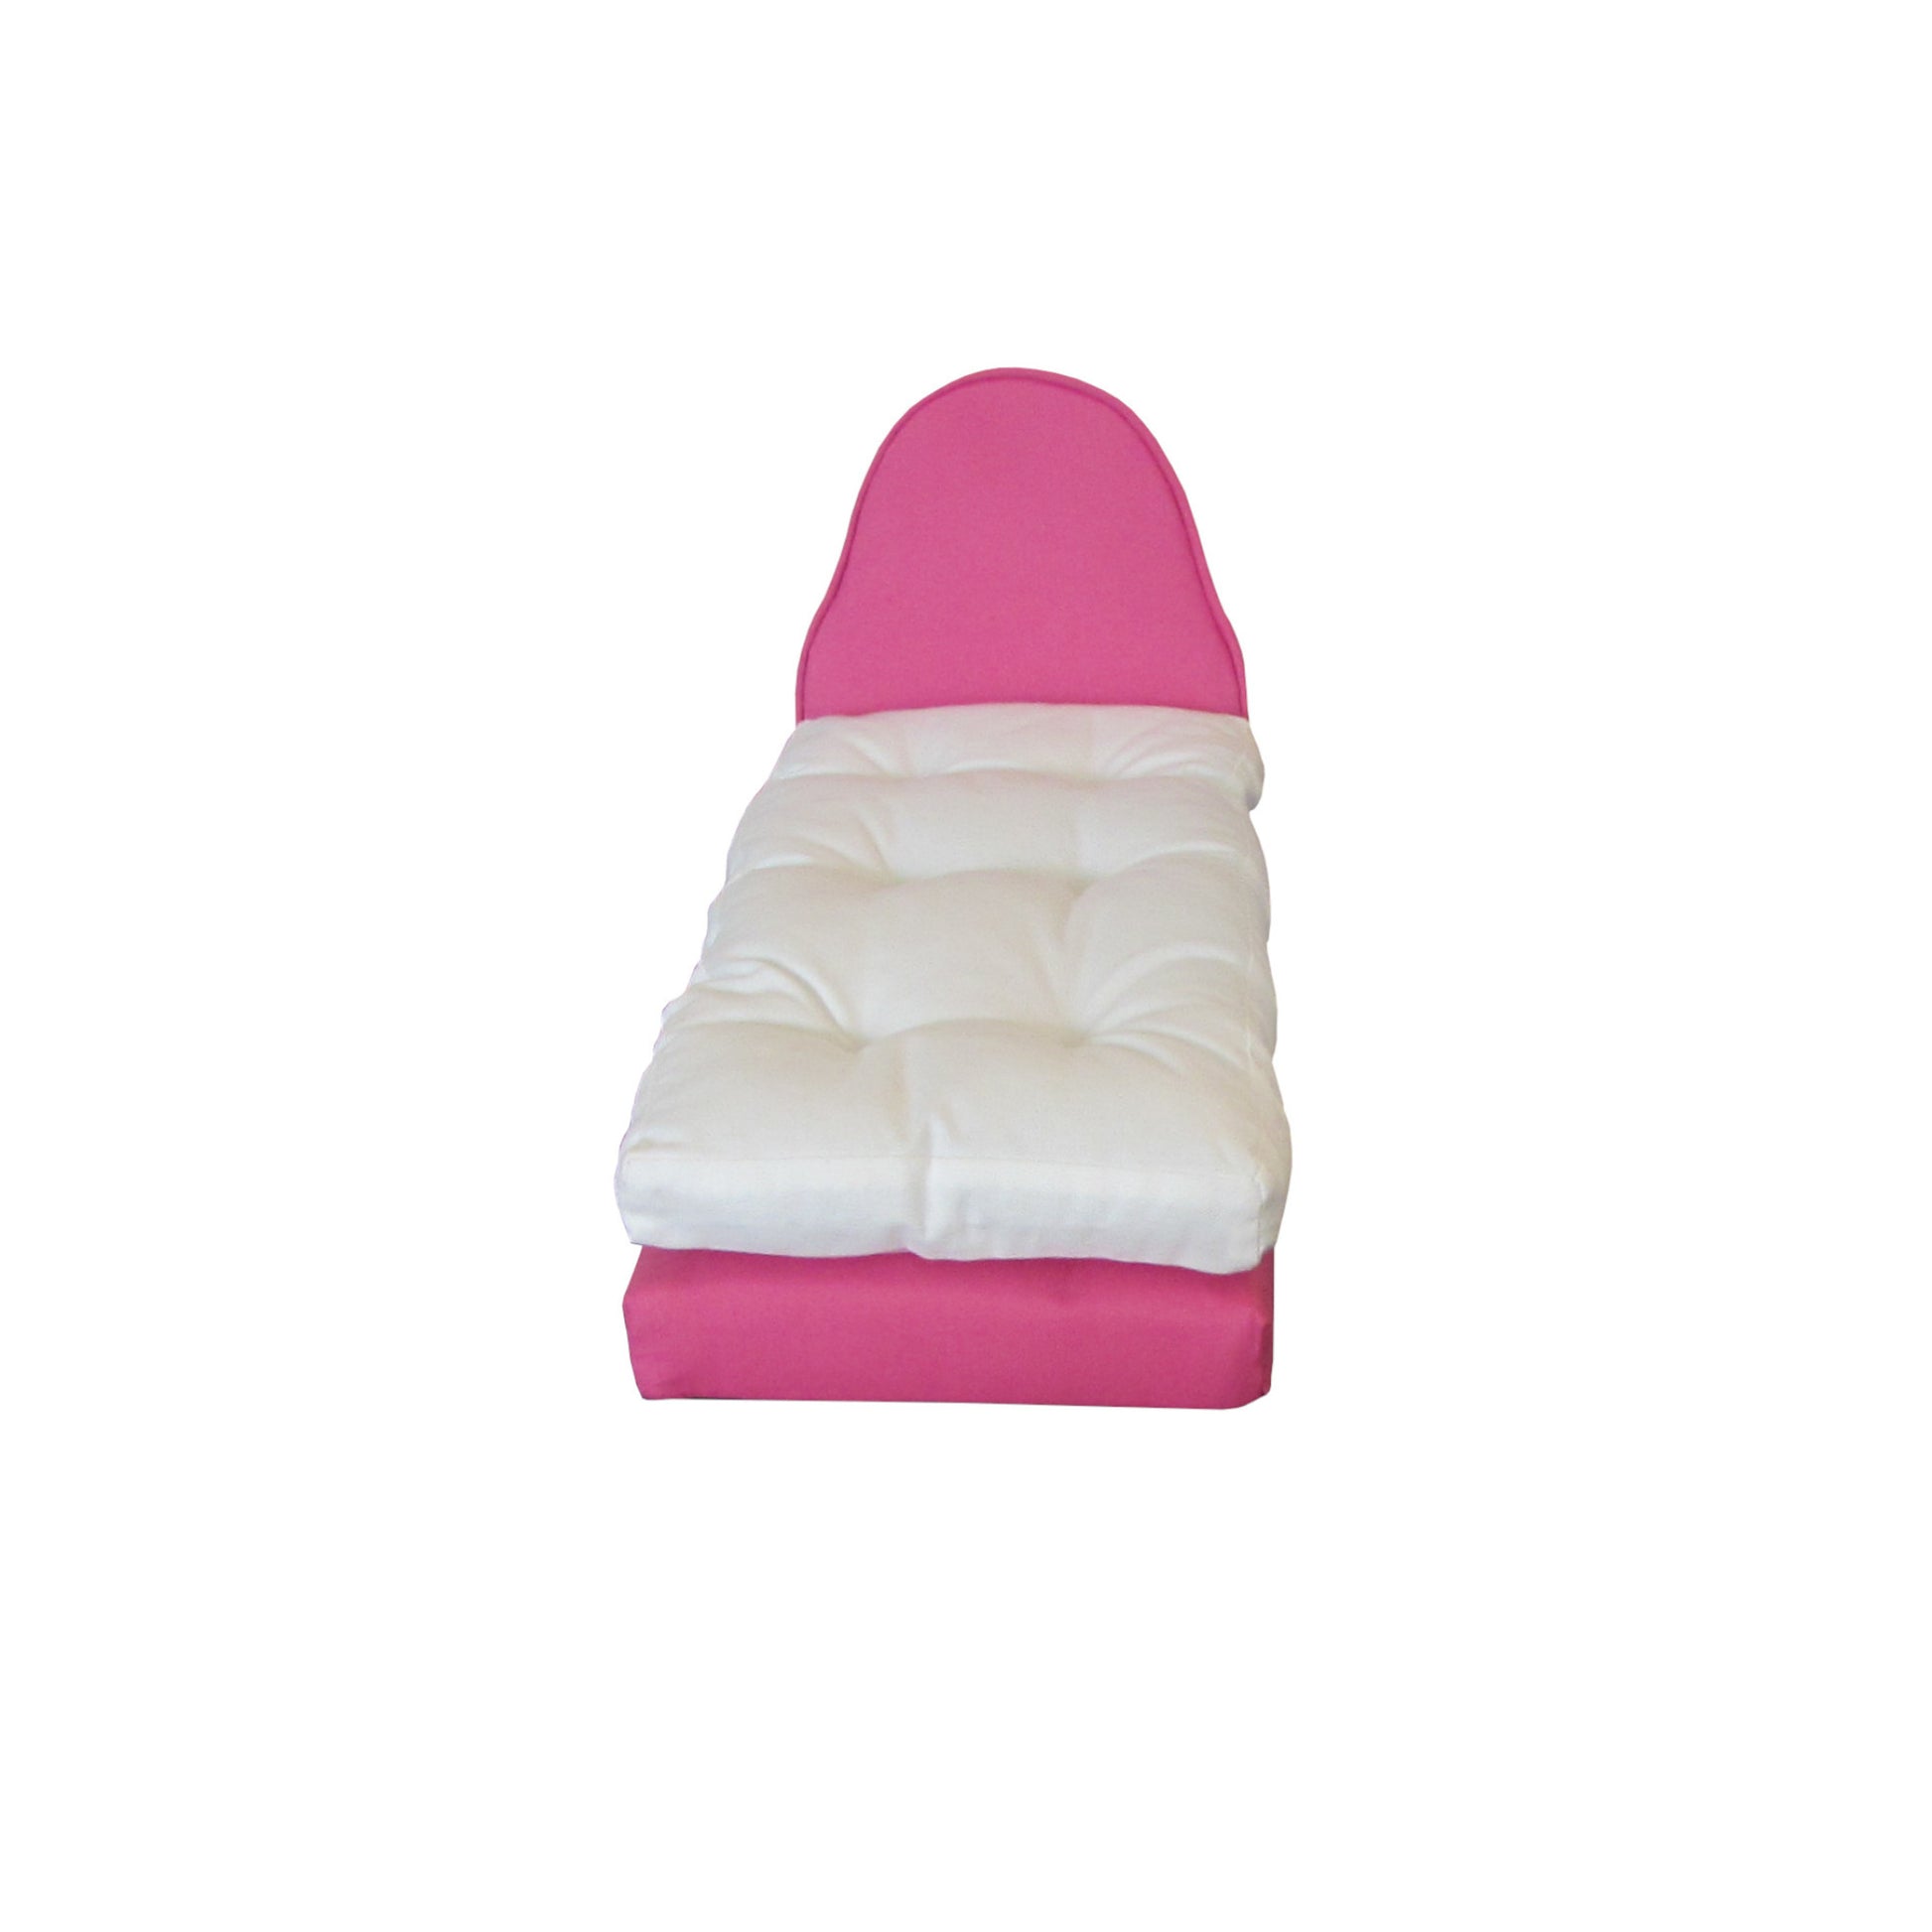 Bright Pink Doll Bed and Mattress for 11.5-inch and 12-inch dolls Second view